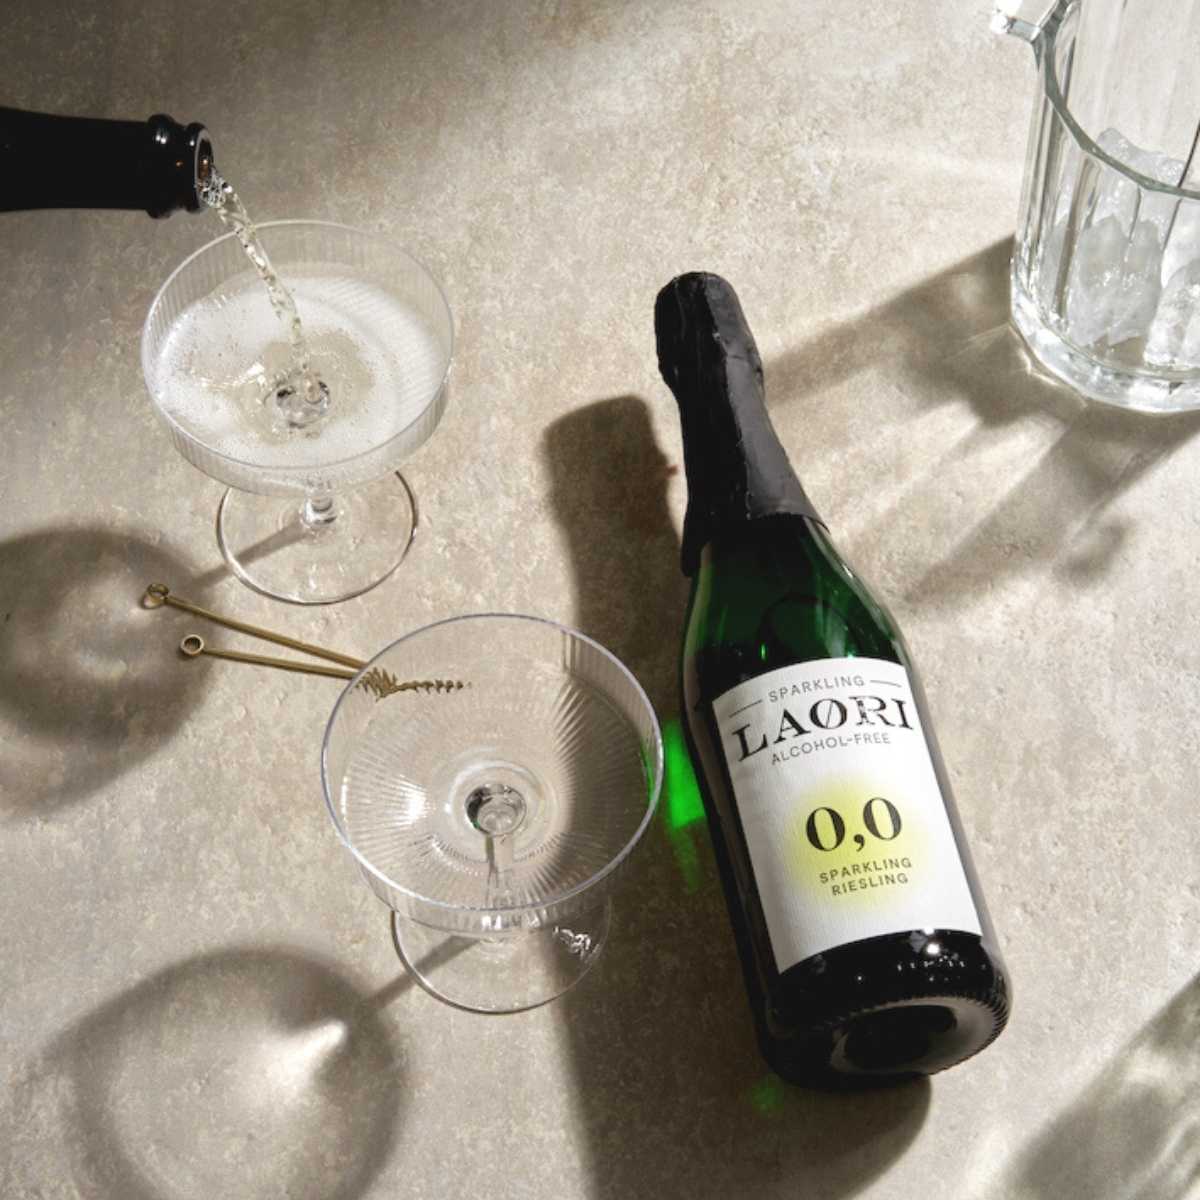 Have it all: 3x Laori Sparkling Riesling (0.75l) - value package